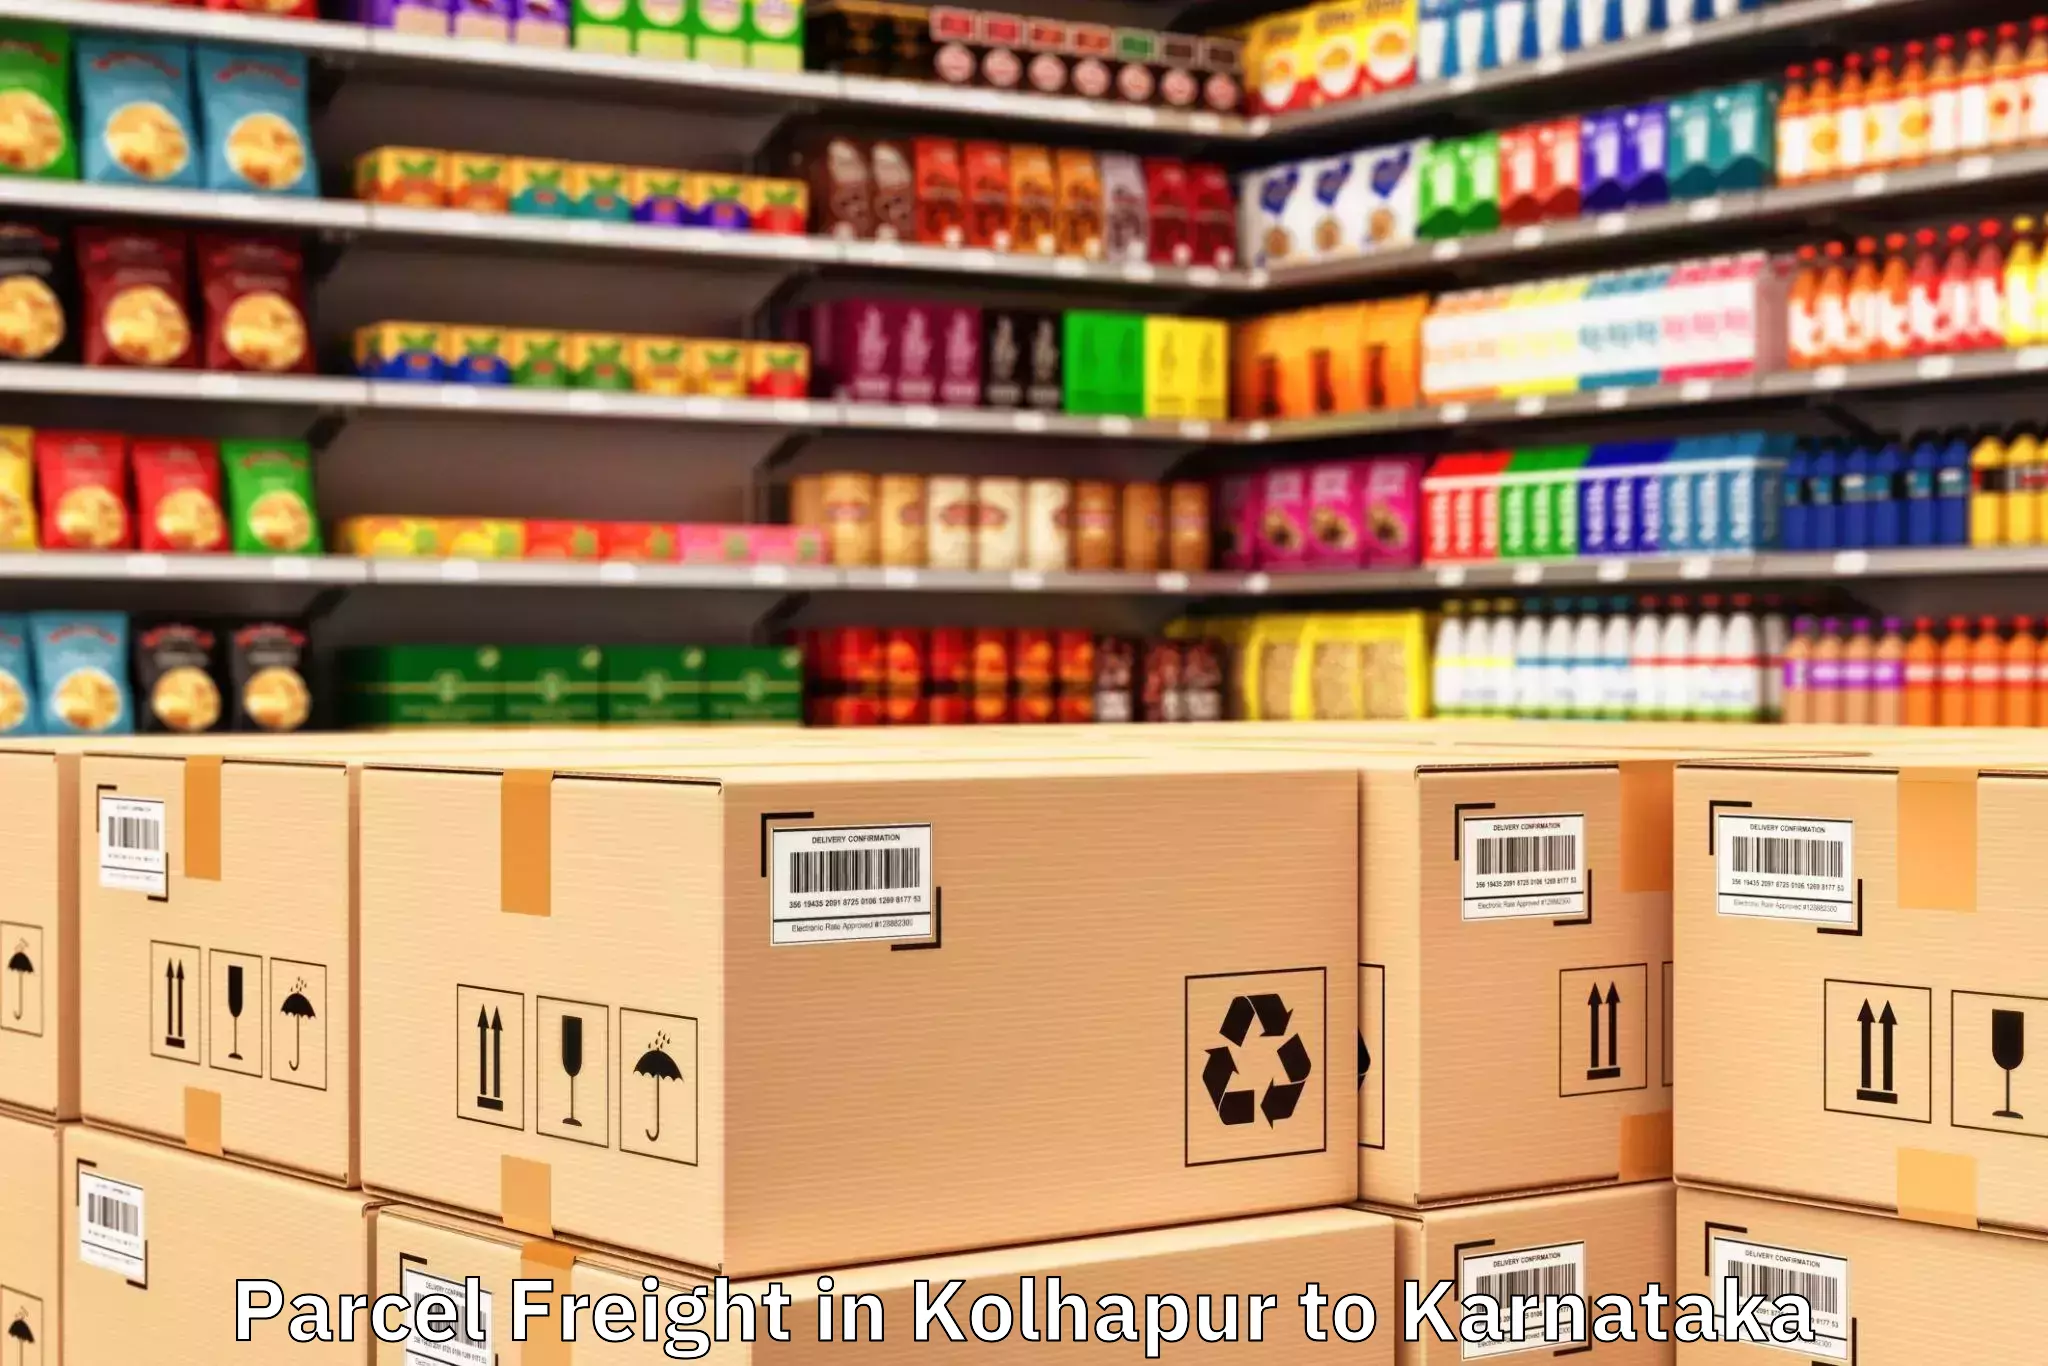 Top Kolhapur to Bharat Mall Mangalore Parcel Freight Available